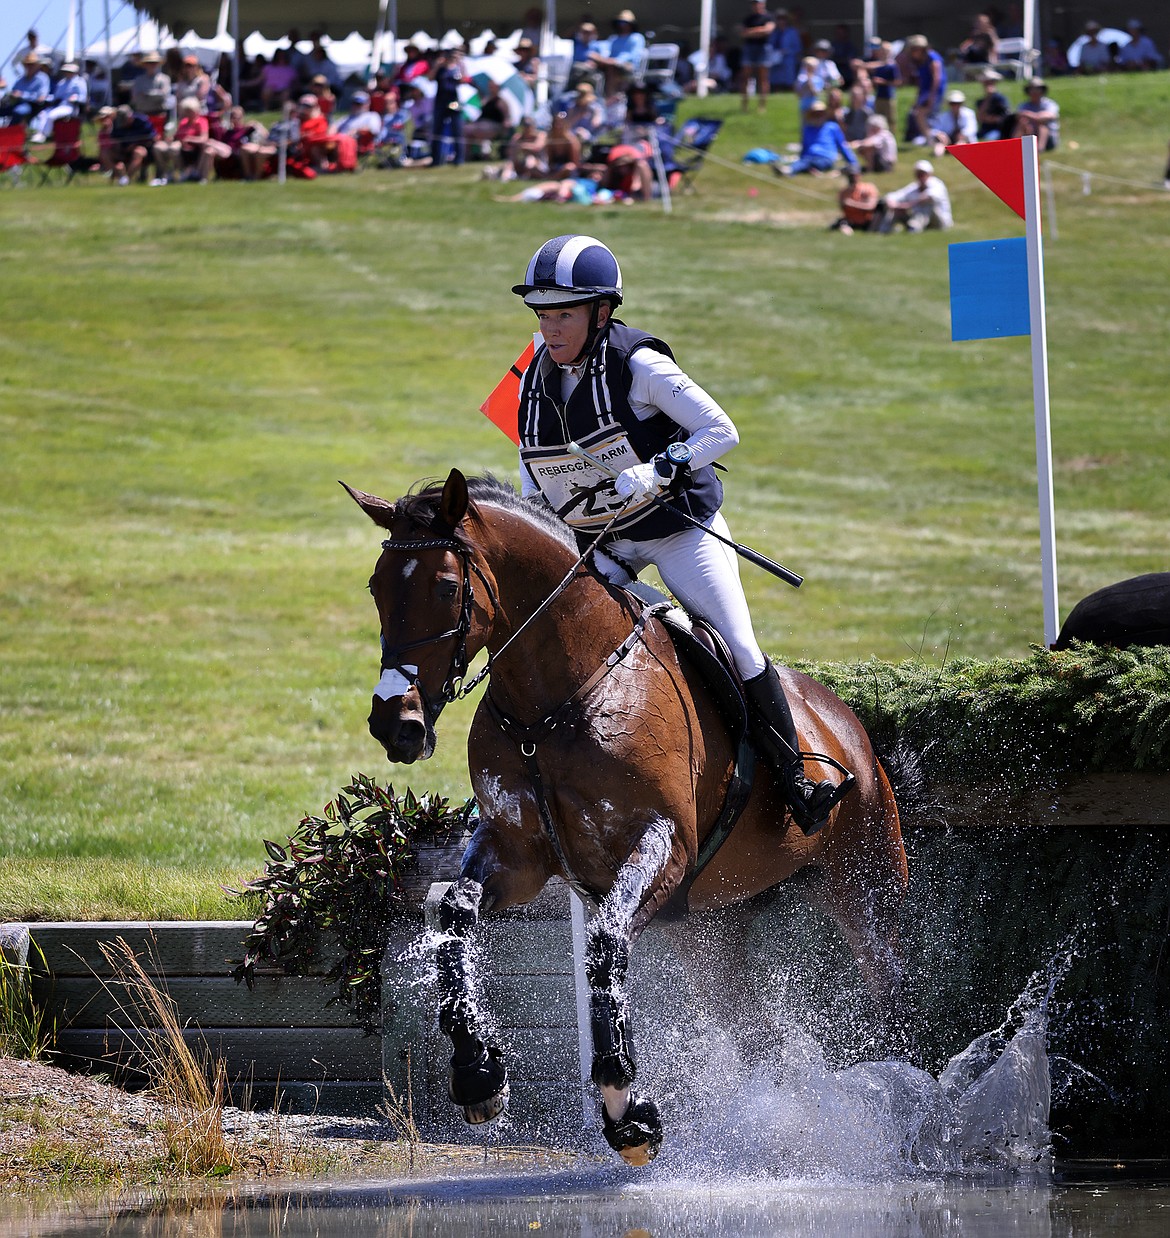 Hawley Bennett-Awad rides "Jollybo" through the second water feature of the three-star long course at The Event at Rebecca Farm July 23. (Jeremy Weber/Daily Inter Lake)